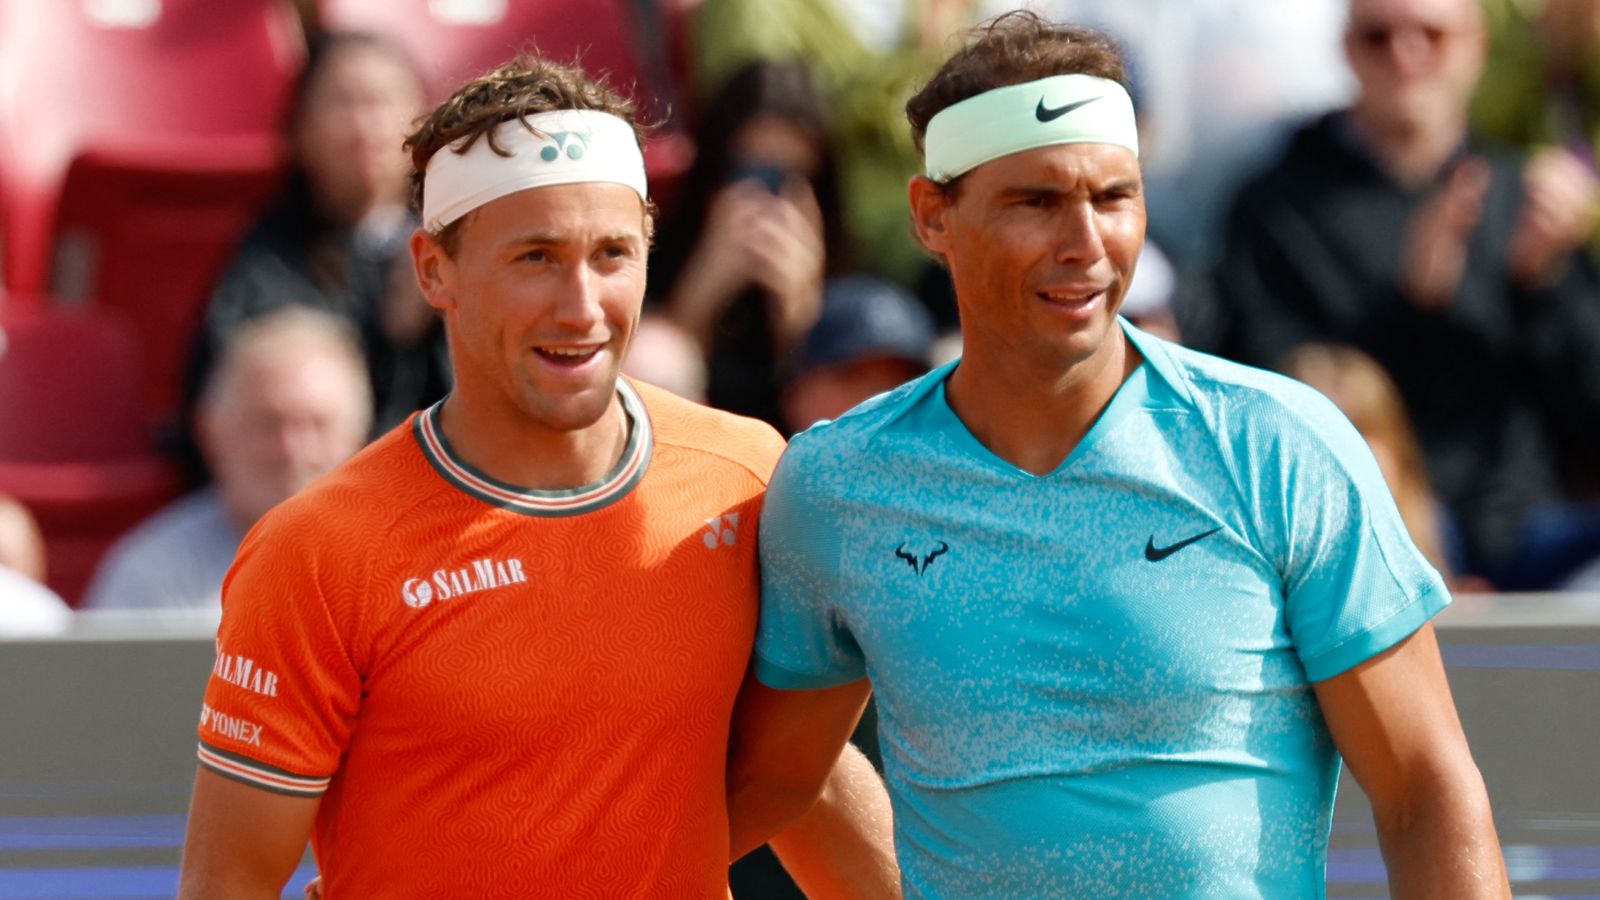 NADAL NETS SWEDISH SUCCESS! Rafa claims doubles title with Casper Ruud ahead of Norrie showdown